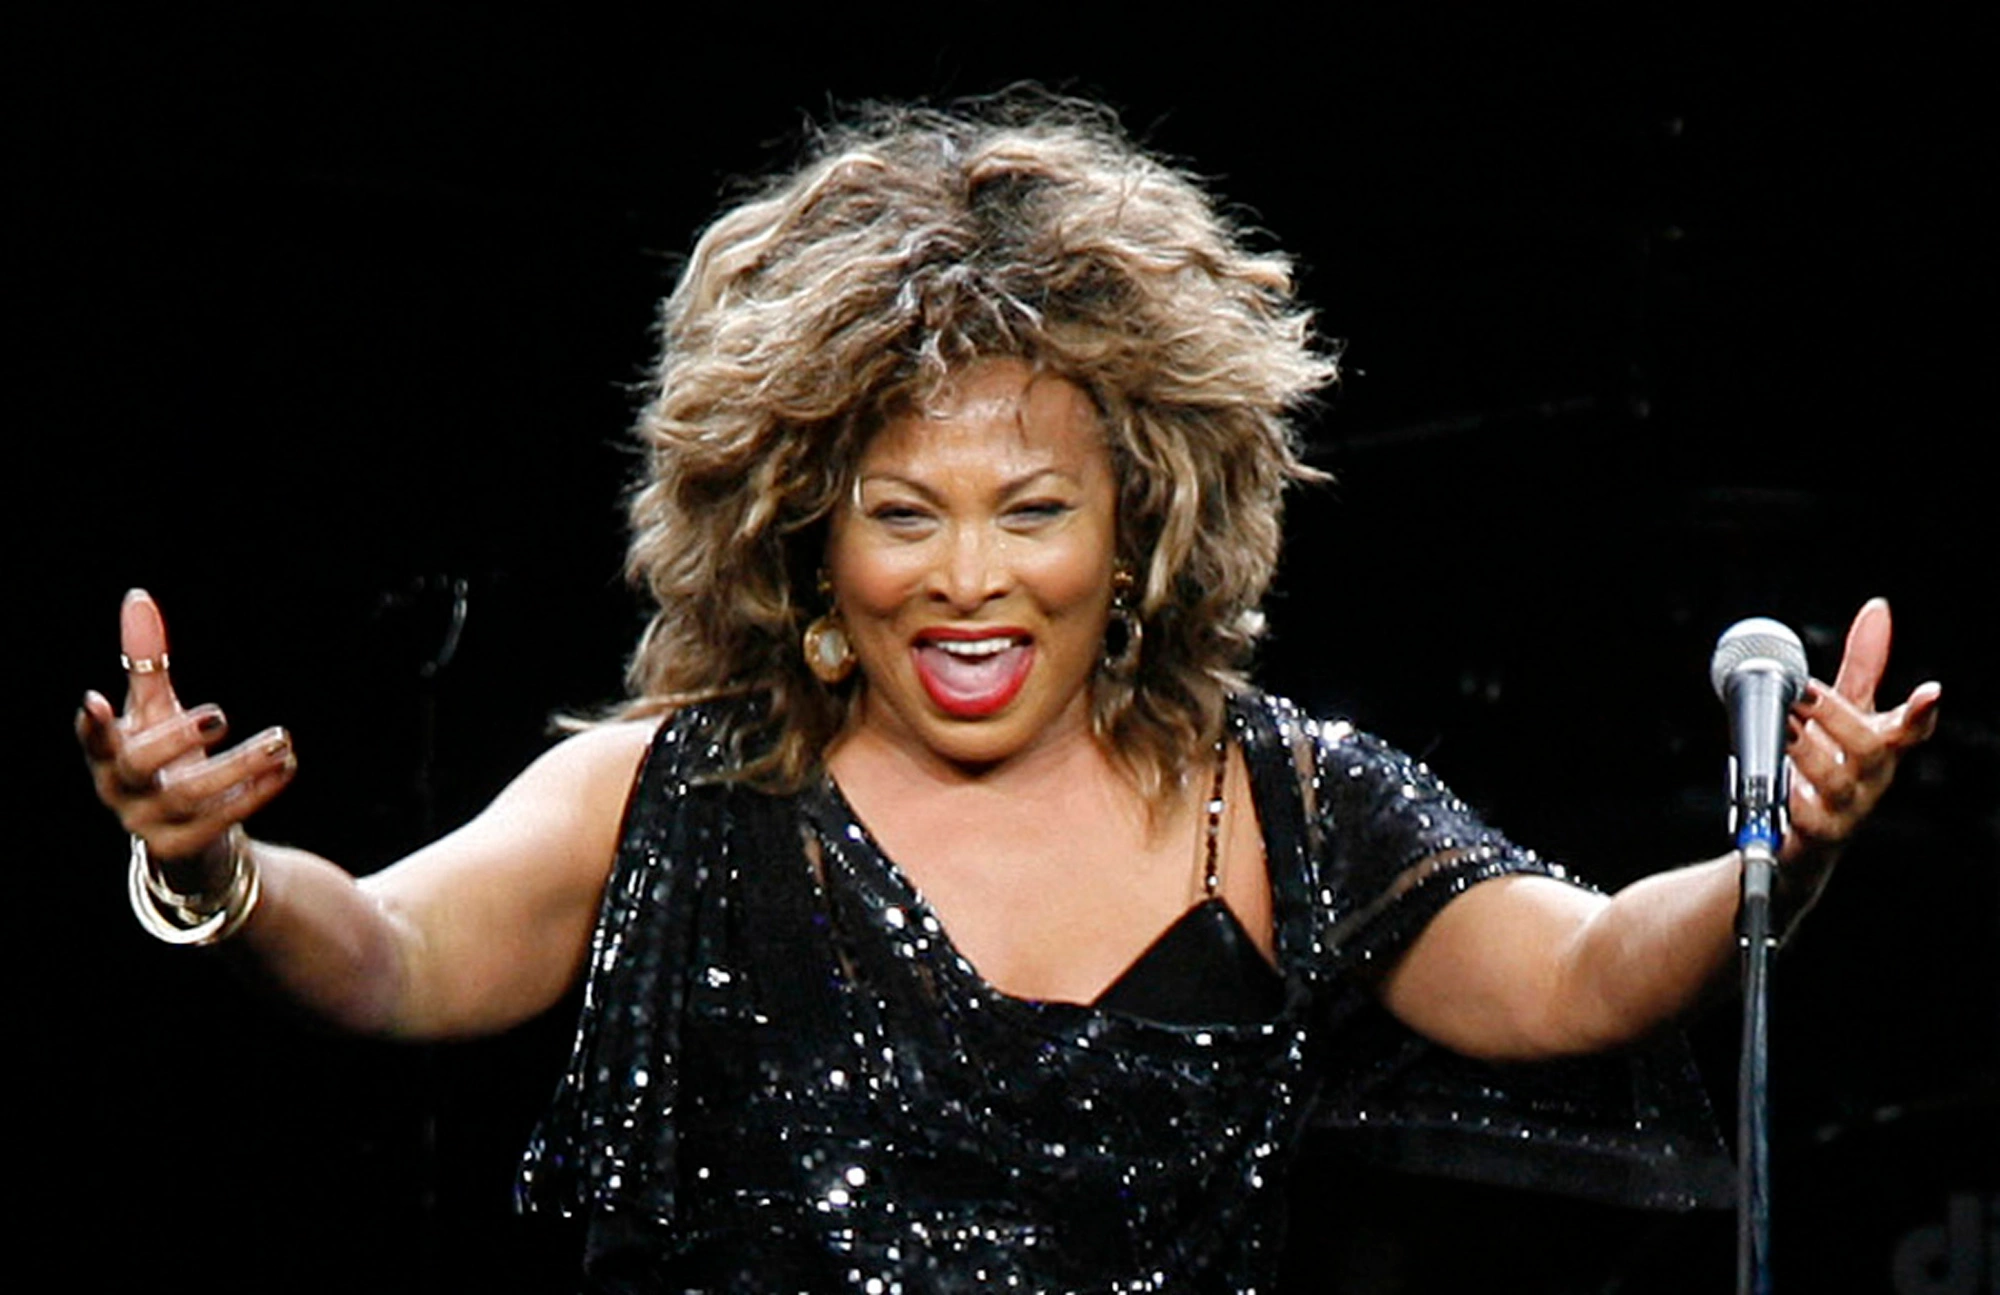 Tina Turner - $250 Million Net Worth, The Queen Of Rock'n Roll